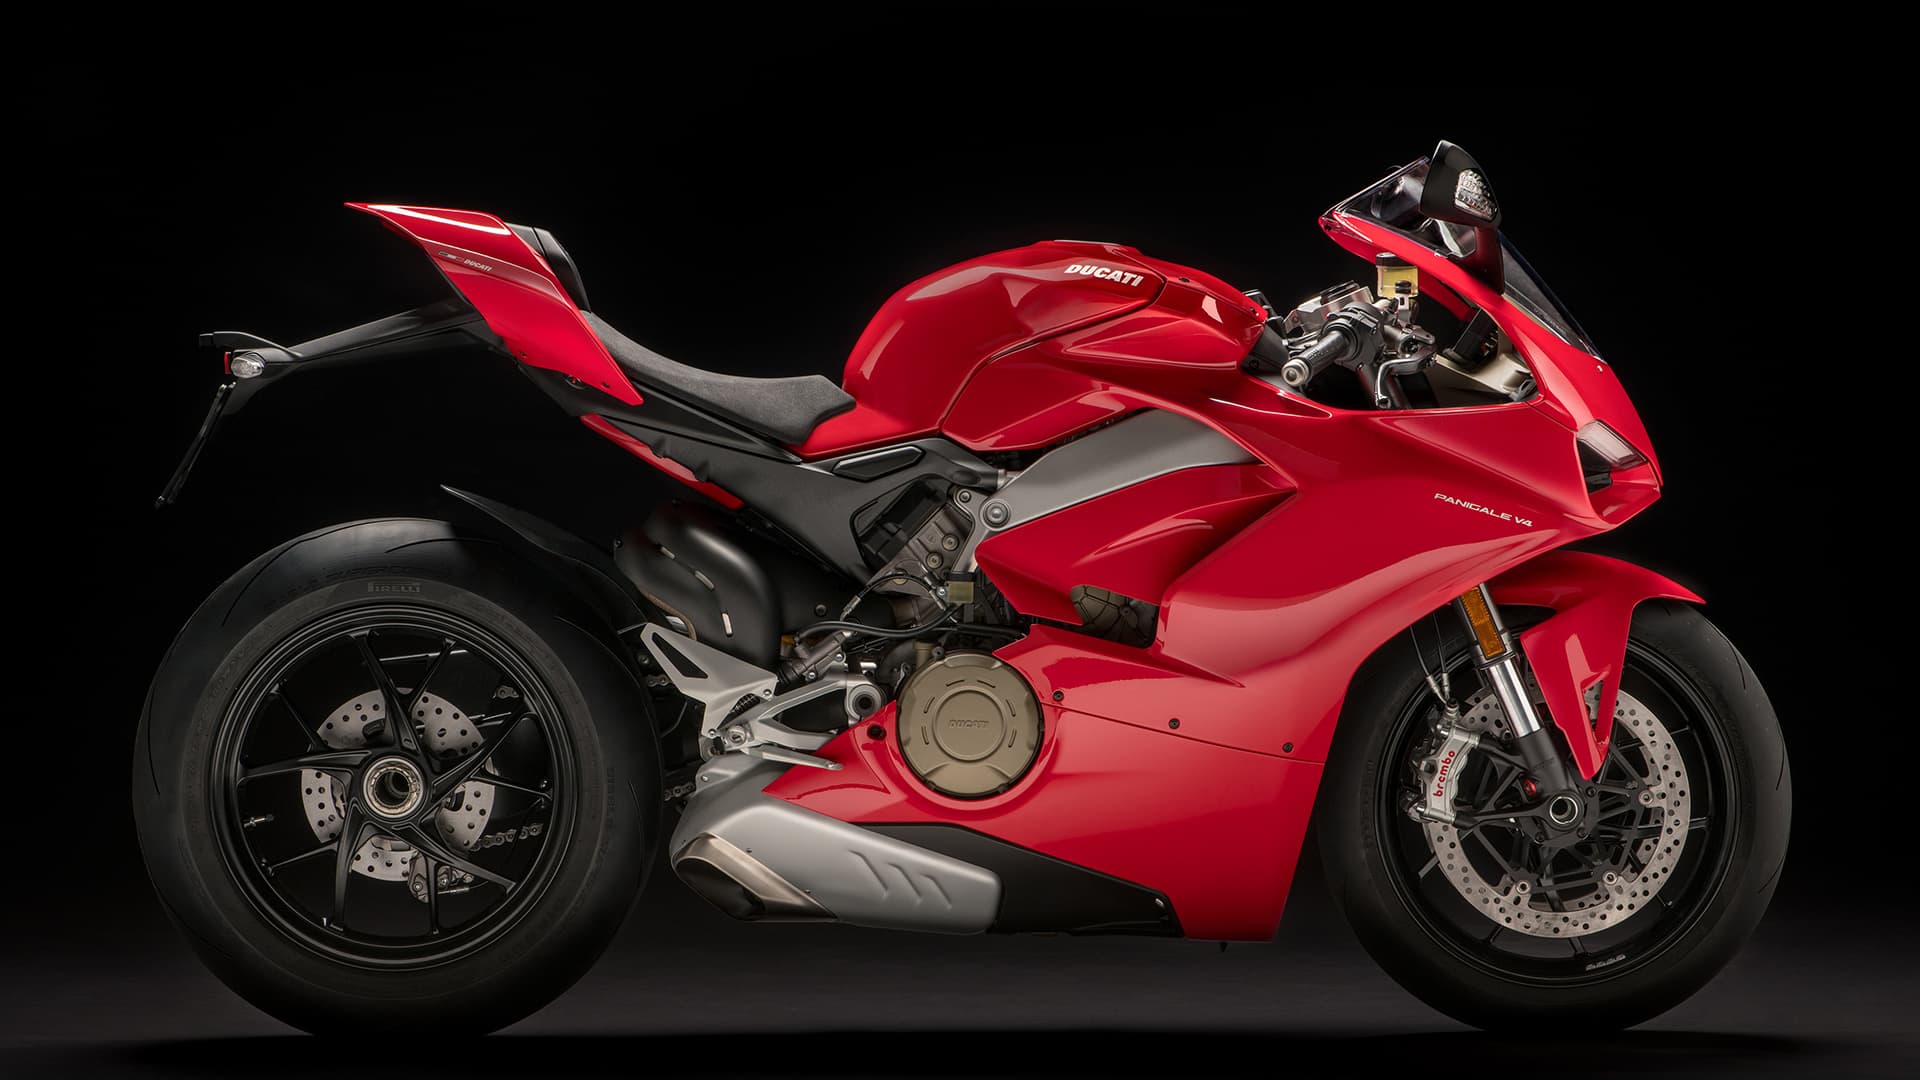 Top 5 most expensive bikes you can buy in India